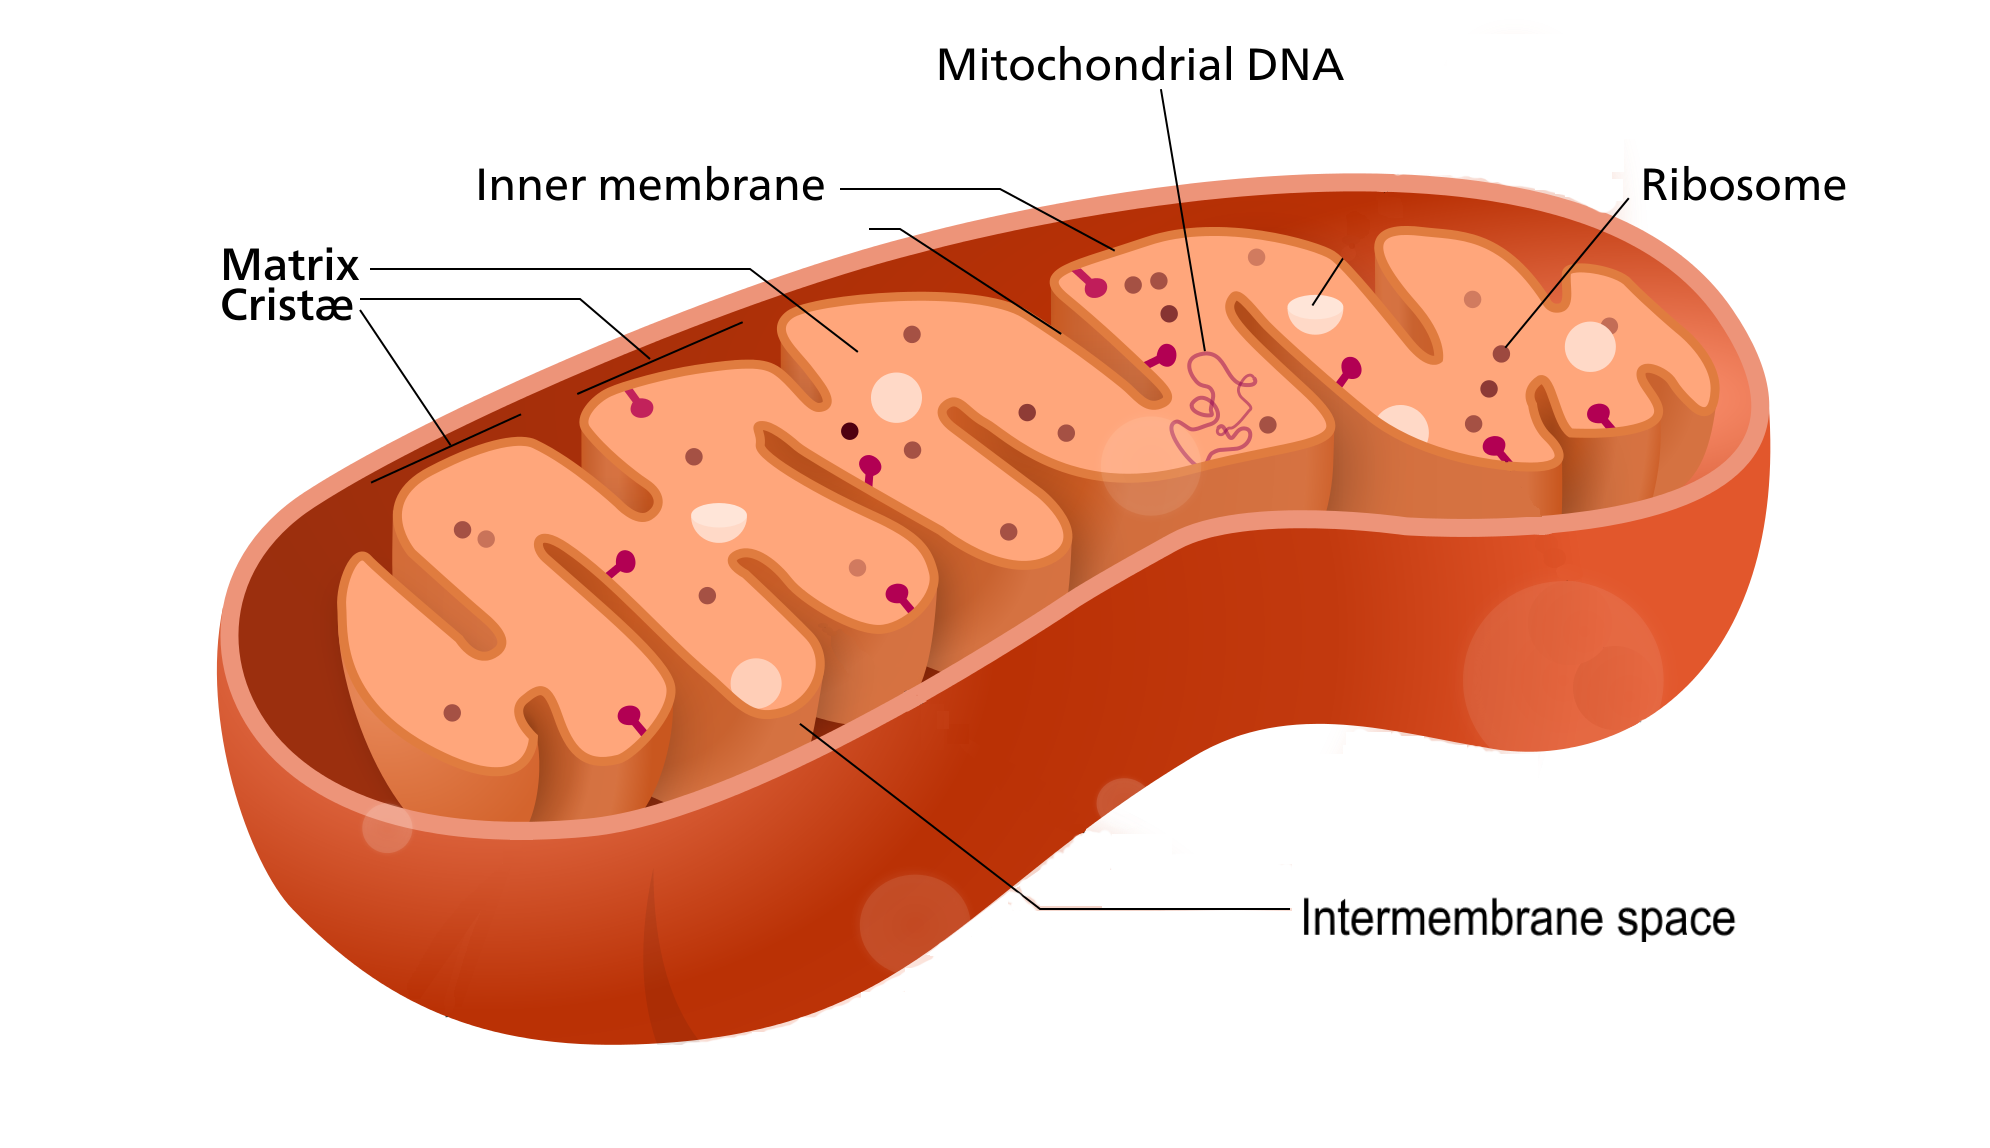 Image shows a diagram of a mitochondrion. Labelled are the inner and outer membranes, the intermembrane space, the matrix, DNA and ribosomes.